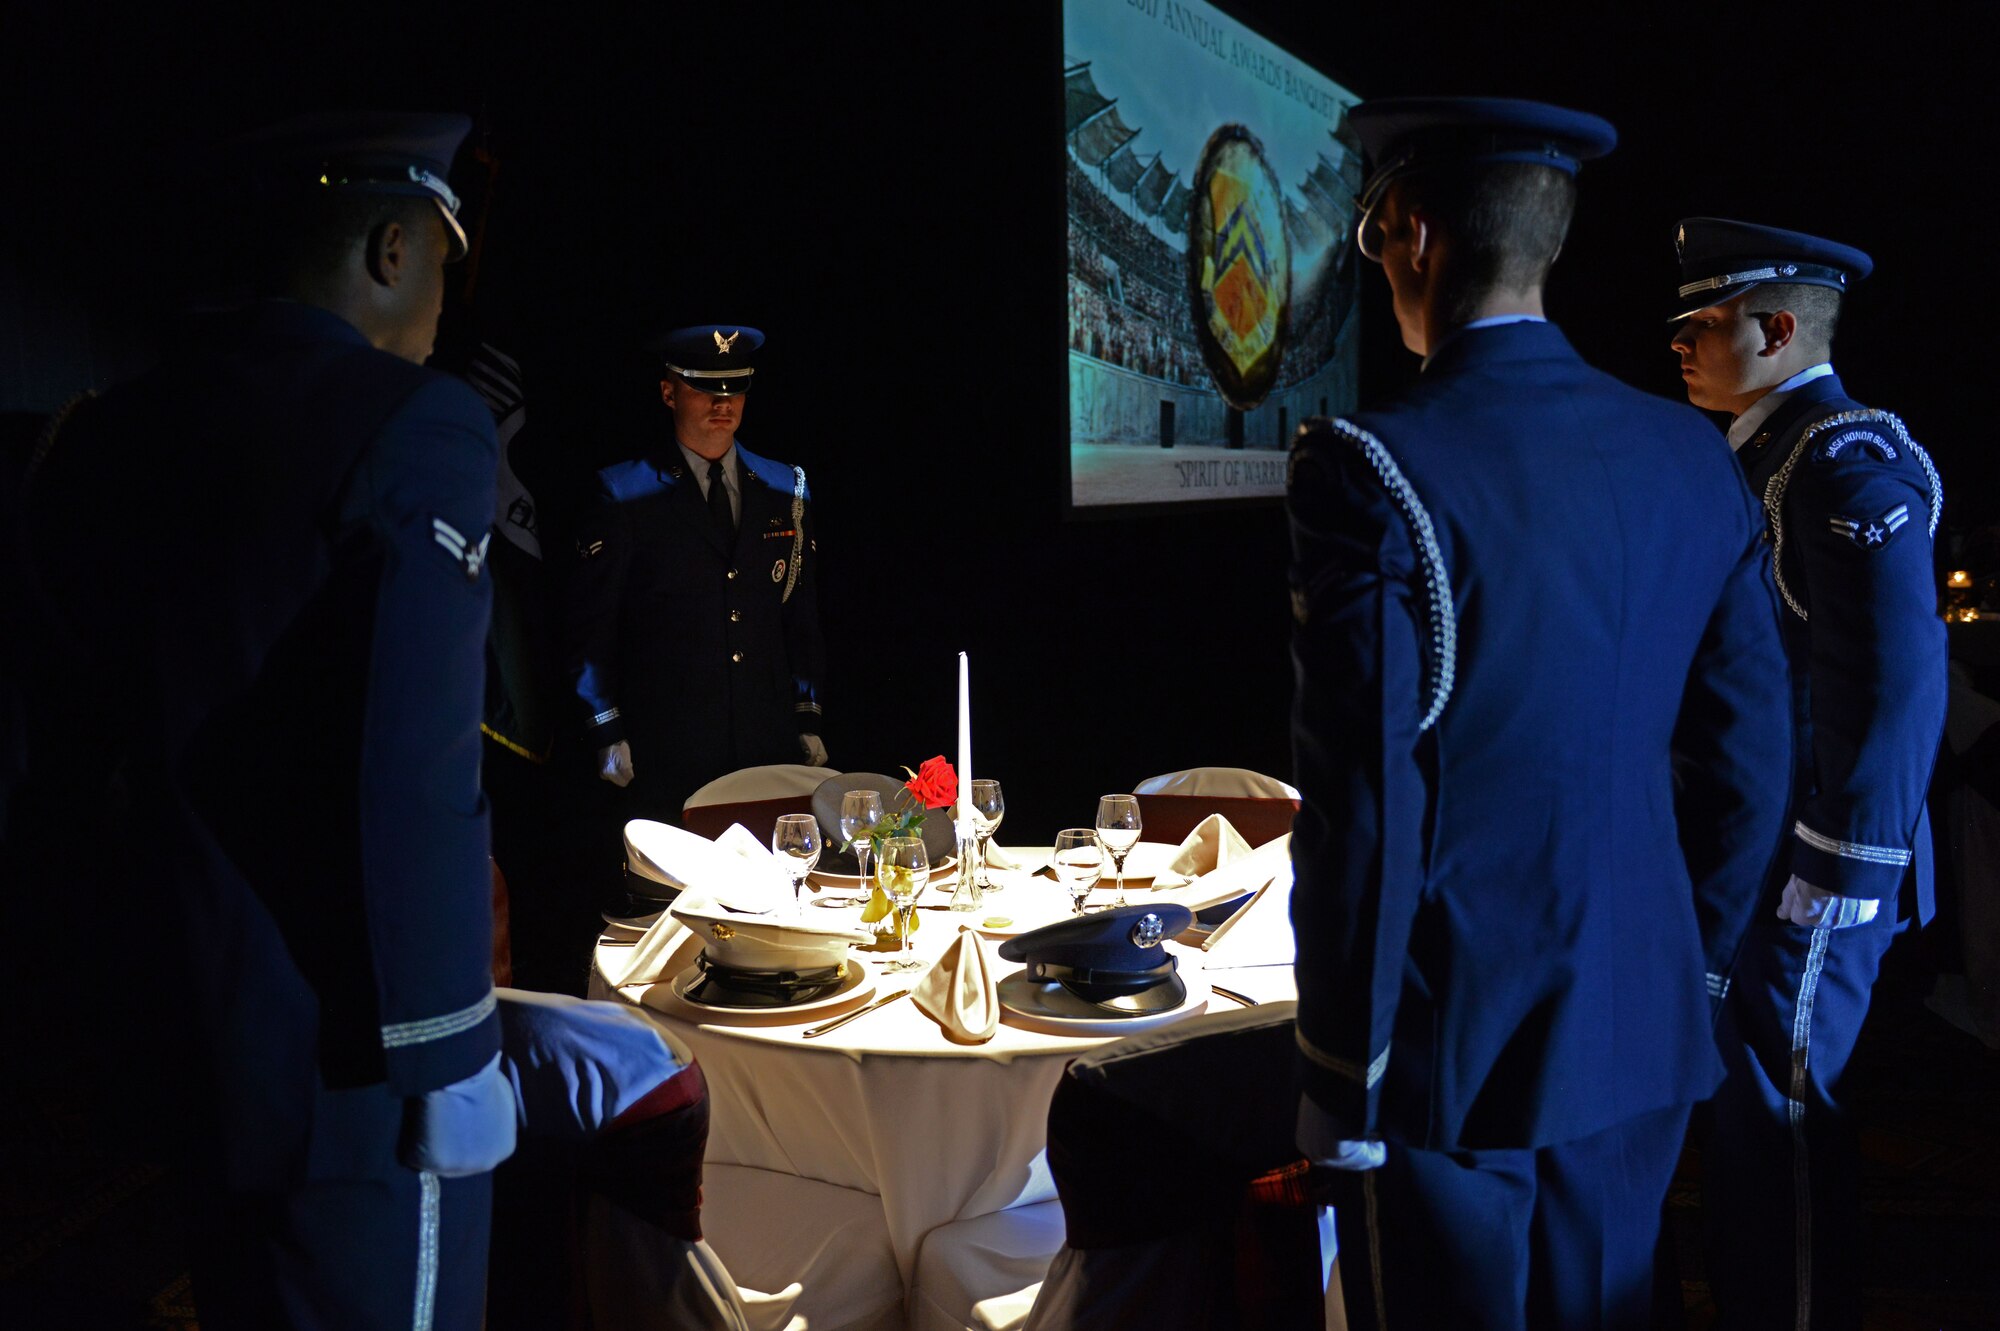 The Luke Air Force Base Honor Guard performs the Missing Man Table and Honors Ceremony at the 2017 Annual Awards Banquet in Litchfield Park, Ariz., Jan. 20, 2018. The Prisoner of War, Missing in Action Ceremony is performed at military banquets in remembrance of service members killed or missing in action. (U.S. Air Force photo/Airman 1st  Class Alexander Cook)